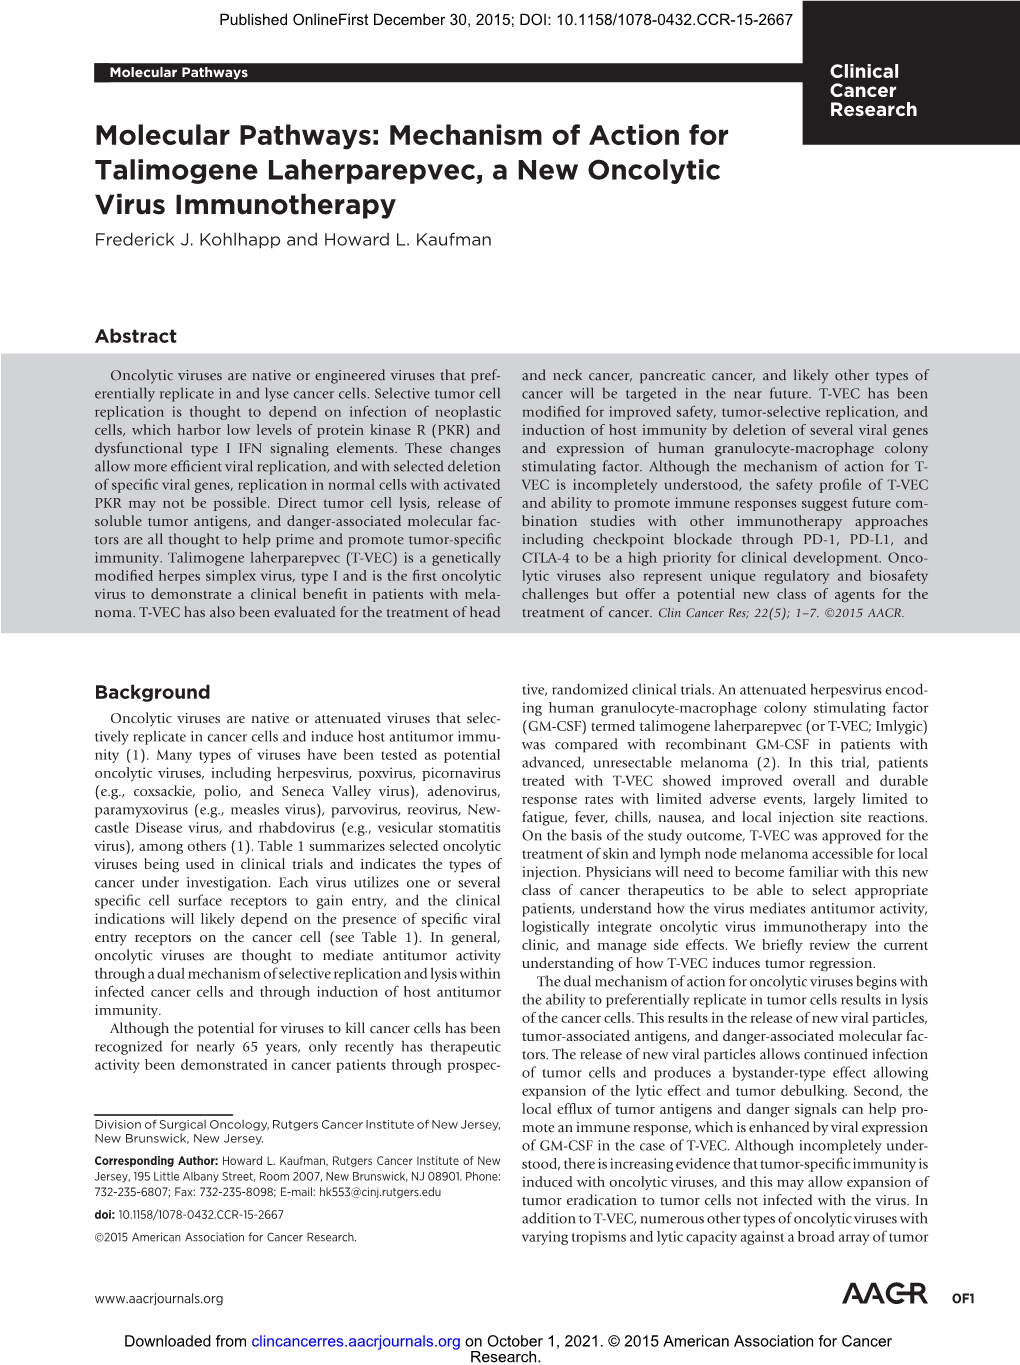 Mechanism of Action for Talimogene Laherparepvec, a New Oncolytic Virus Immunotherapy Frederick J